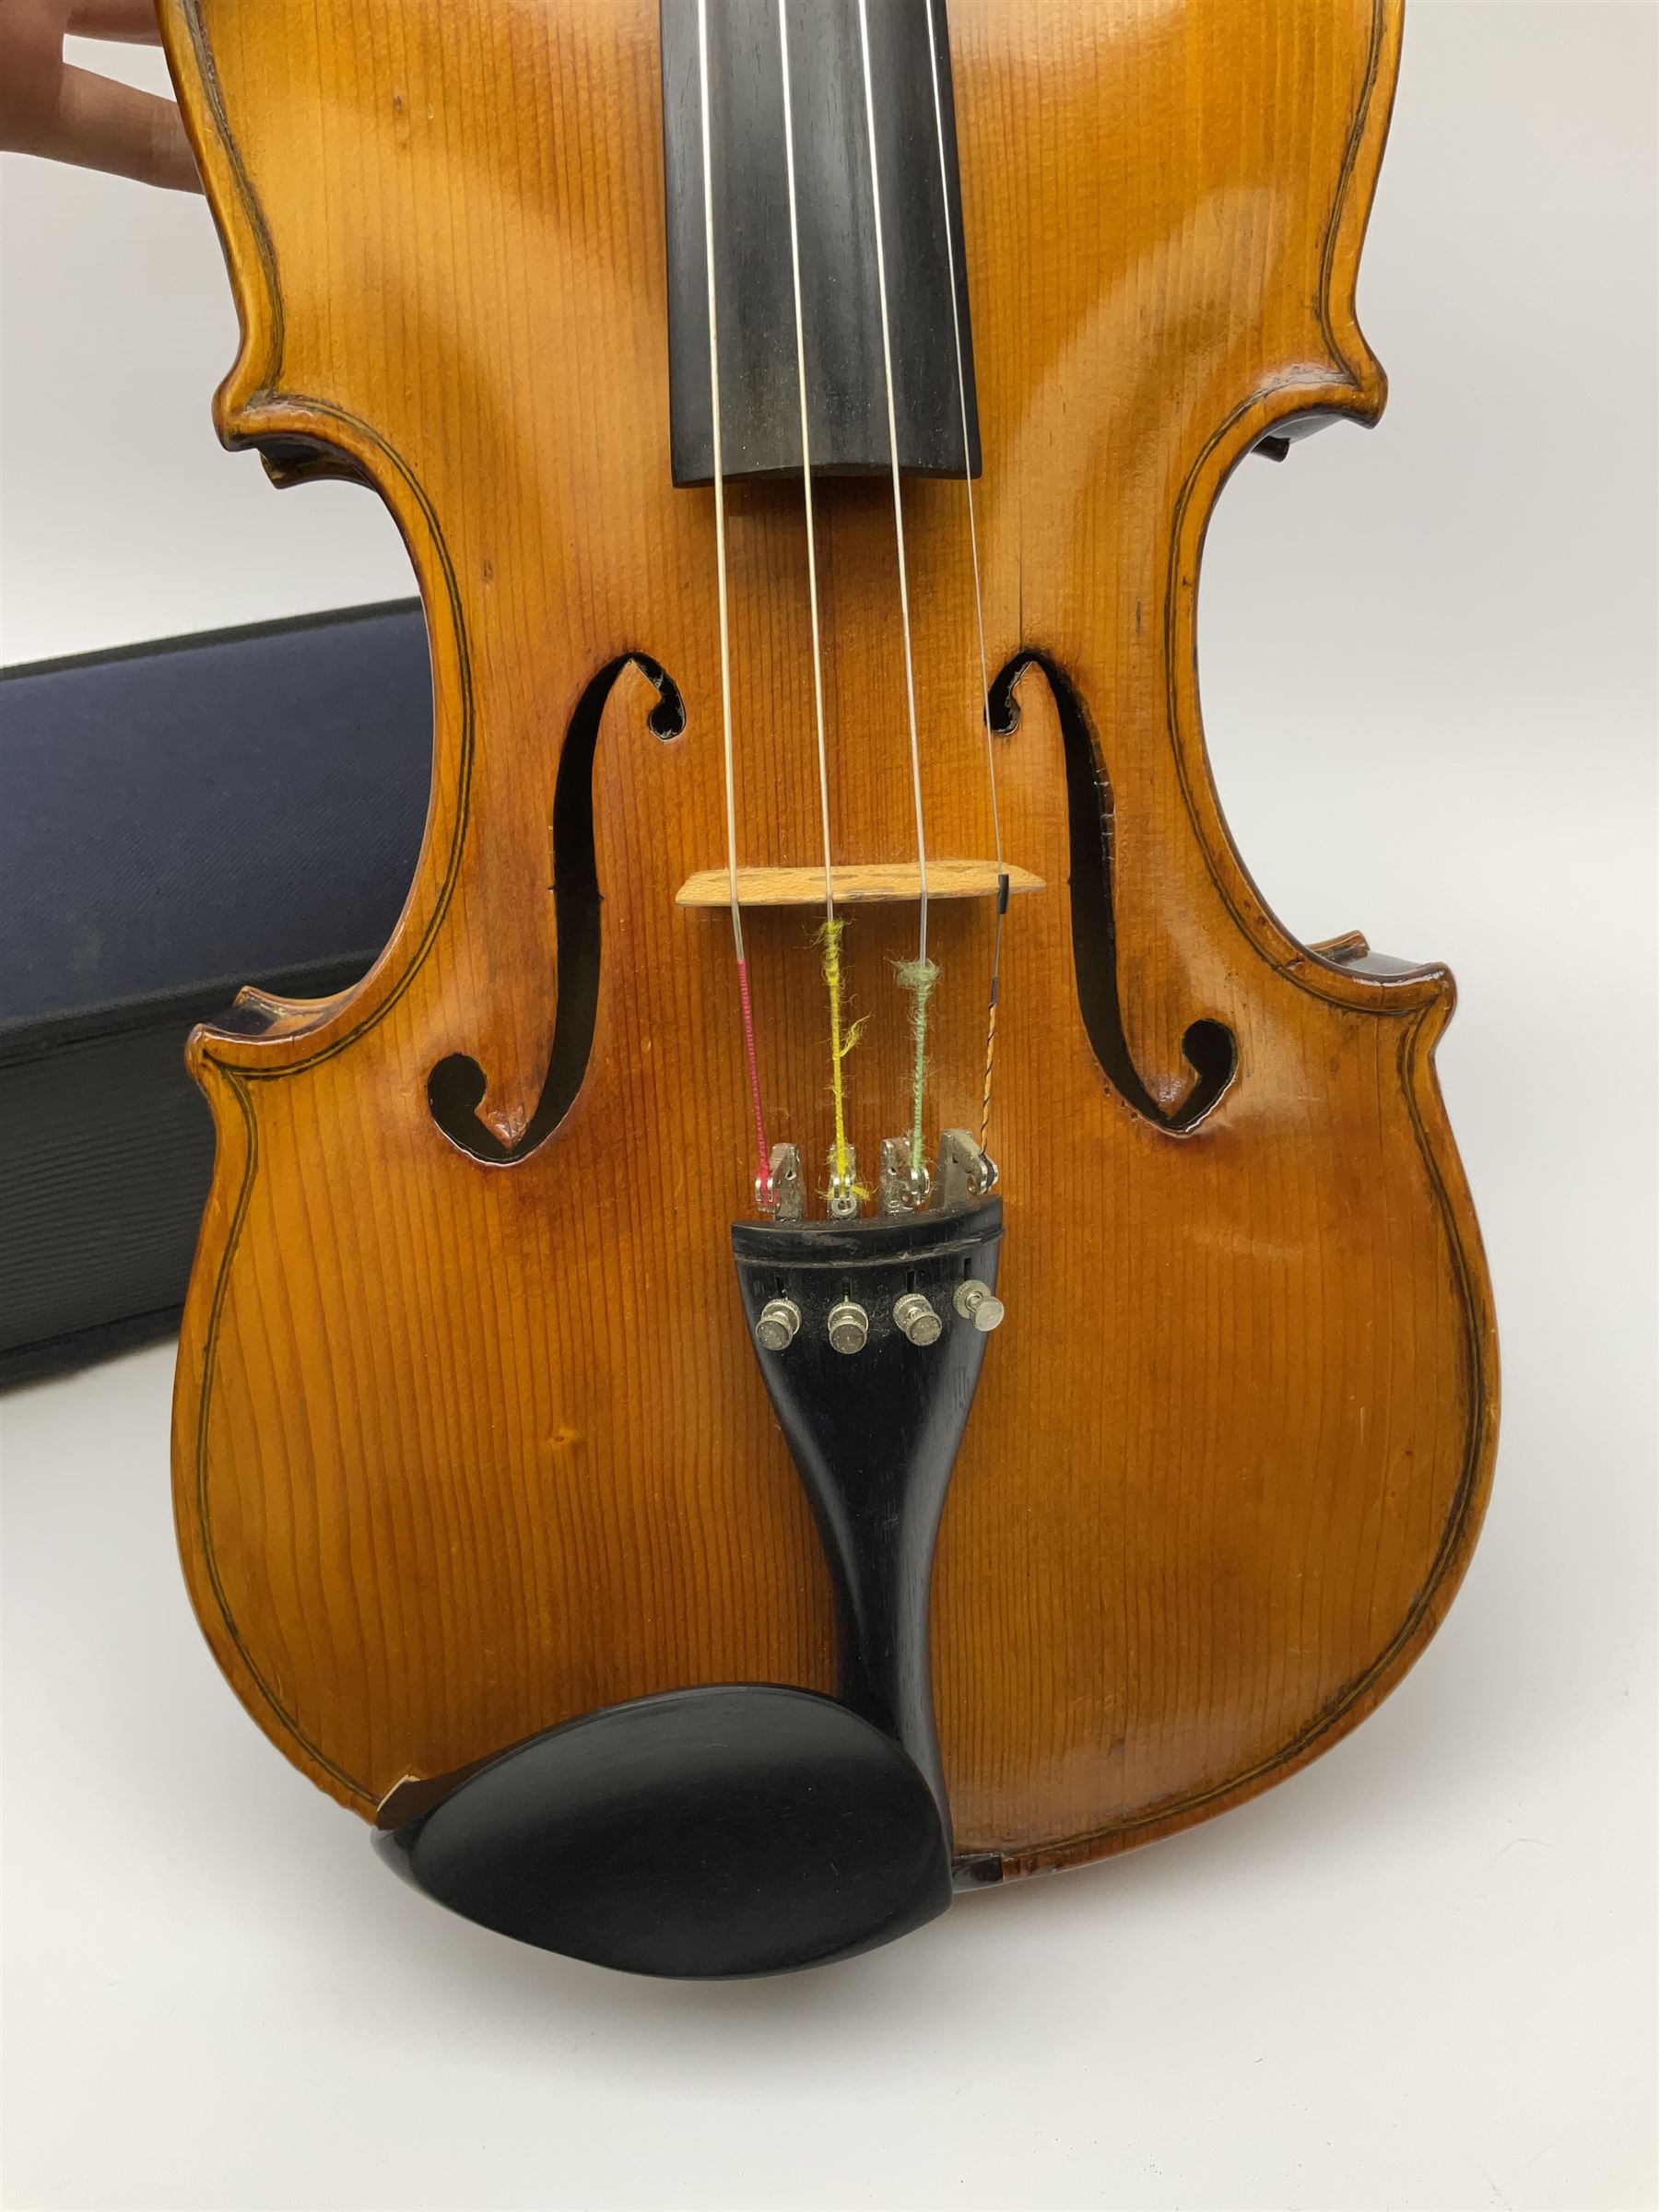 1920s continental large viola with 42cm two-piece maple back and ribs and wide grain sprucewood top - Image 3 of 21